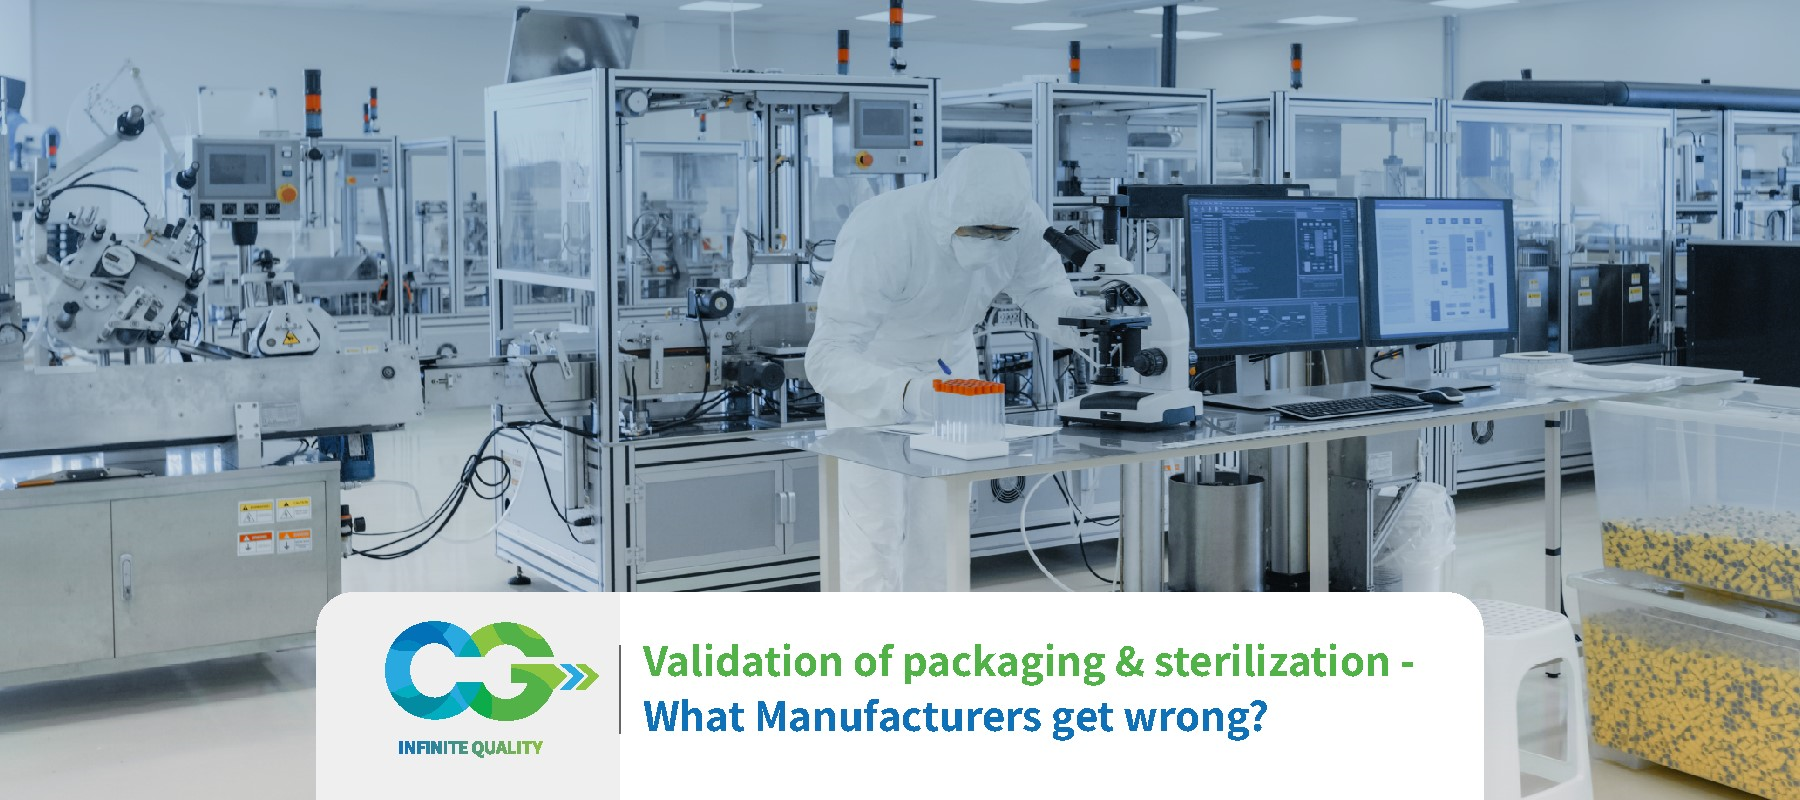 medical-device-packaging-validation